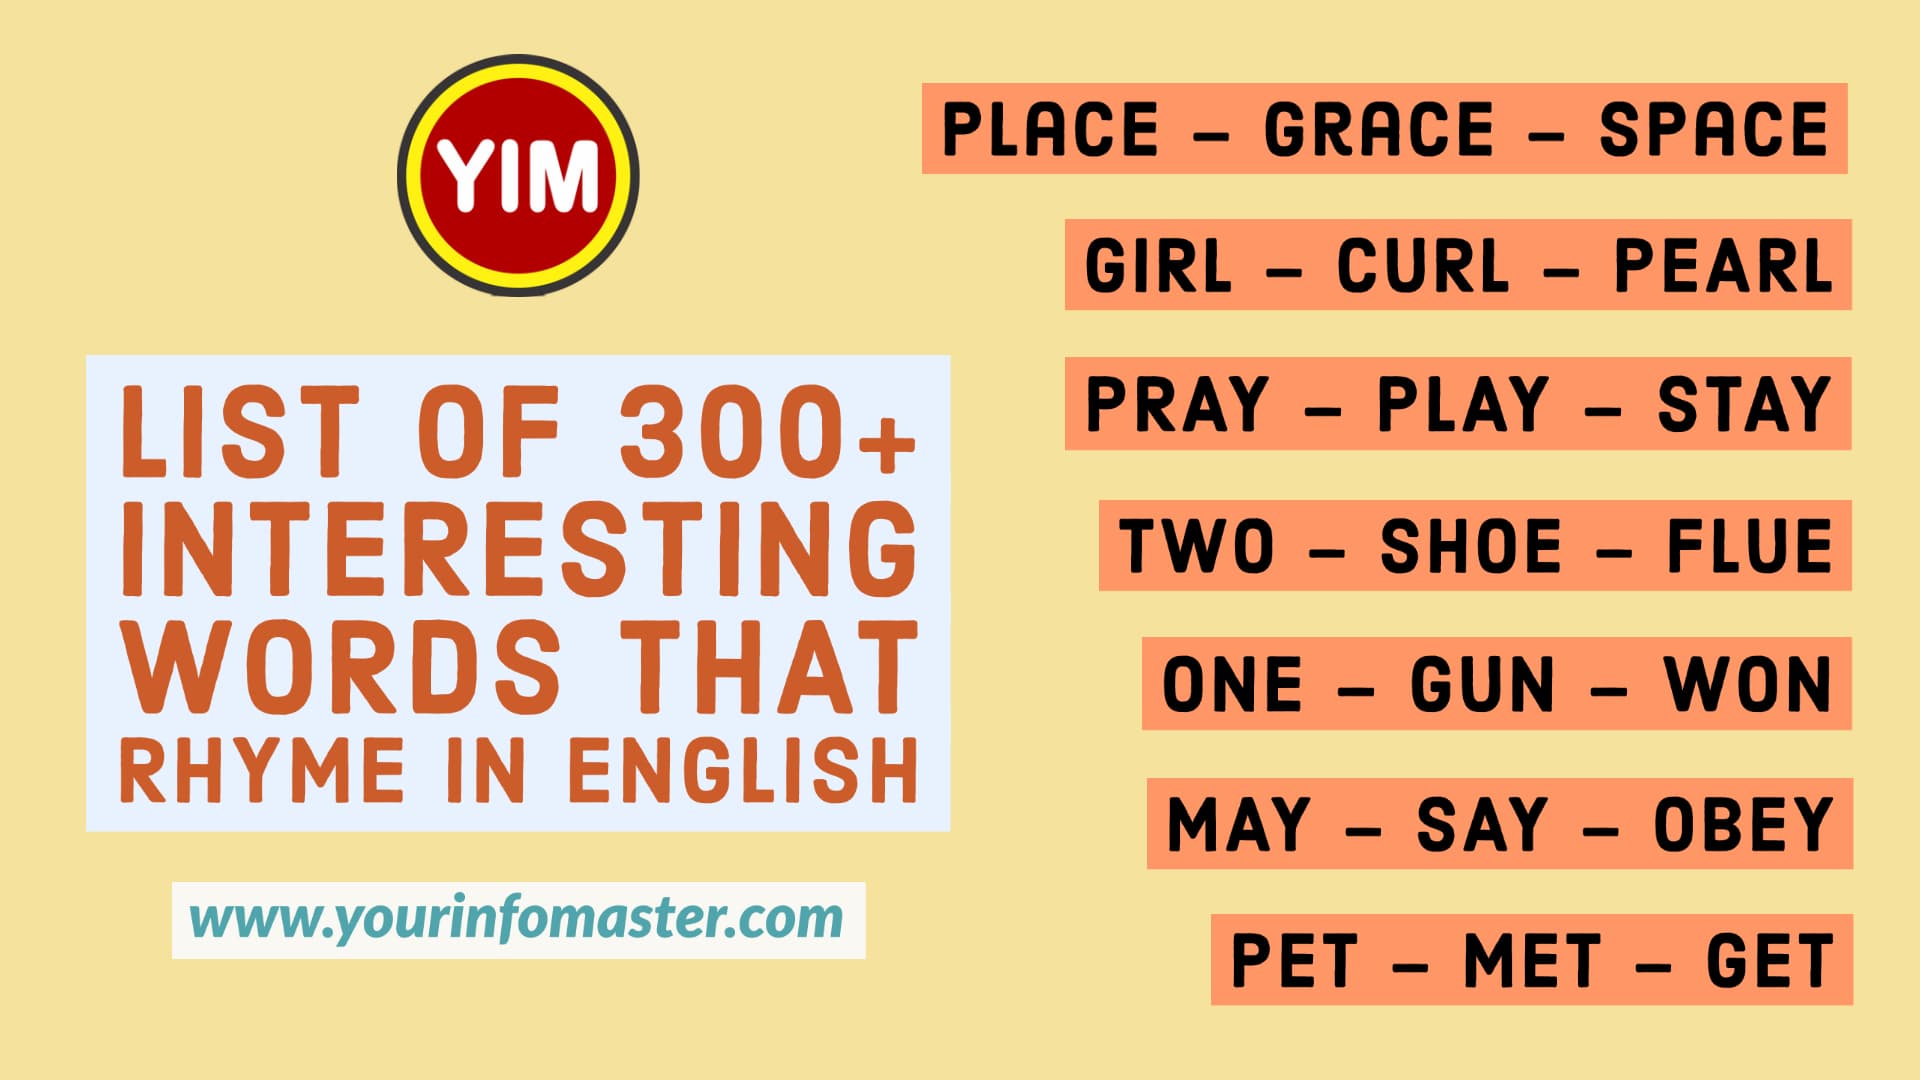 300 rhyming words list, 300+ Interesting Words, are rhyming words, by rhyming words, how to teach rhyming words, Interesting Words that Rhyme in English, Rhyming Words, rhyming words for fun, Rhyming Words for Kids, Rhyming Words List, what are rhyming words, words rhyming with one, Words that Rhyme